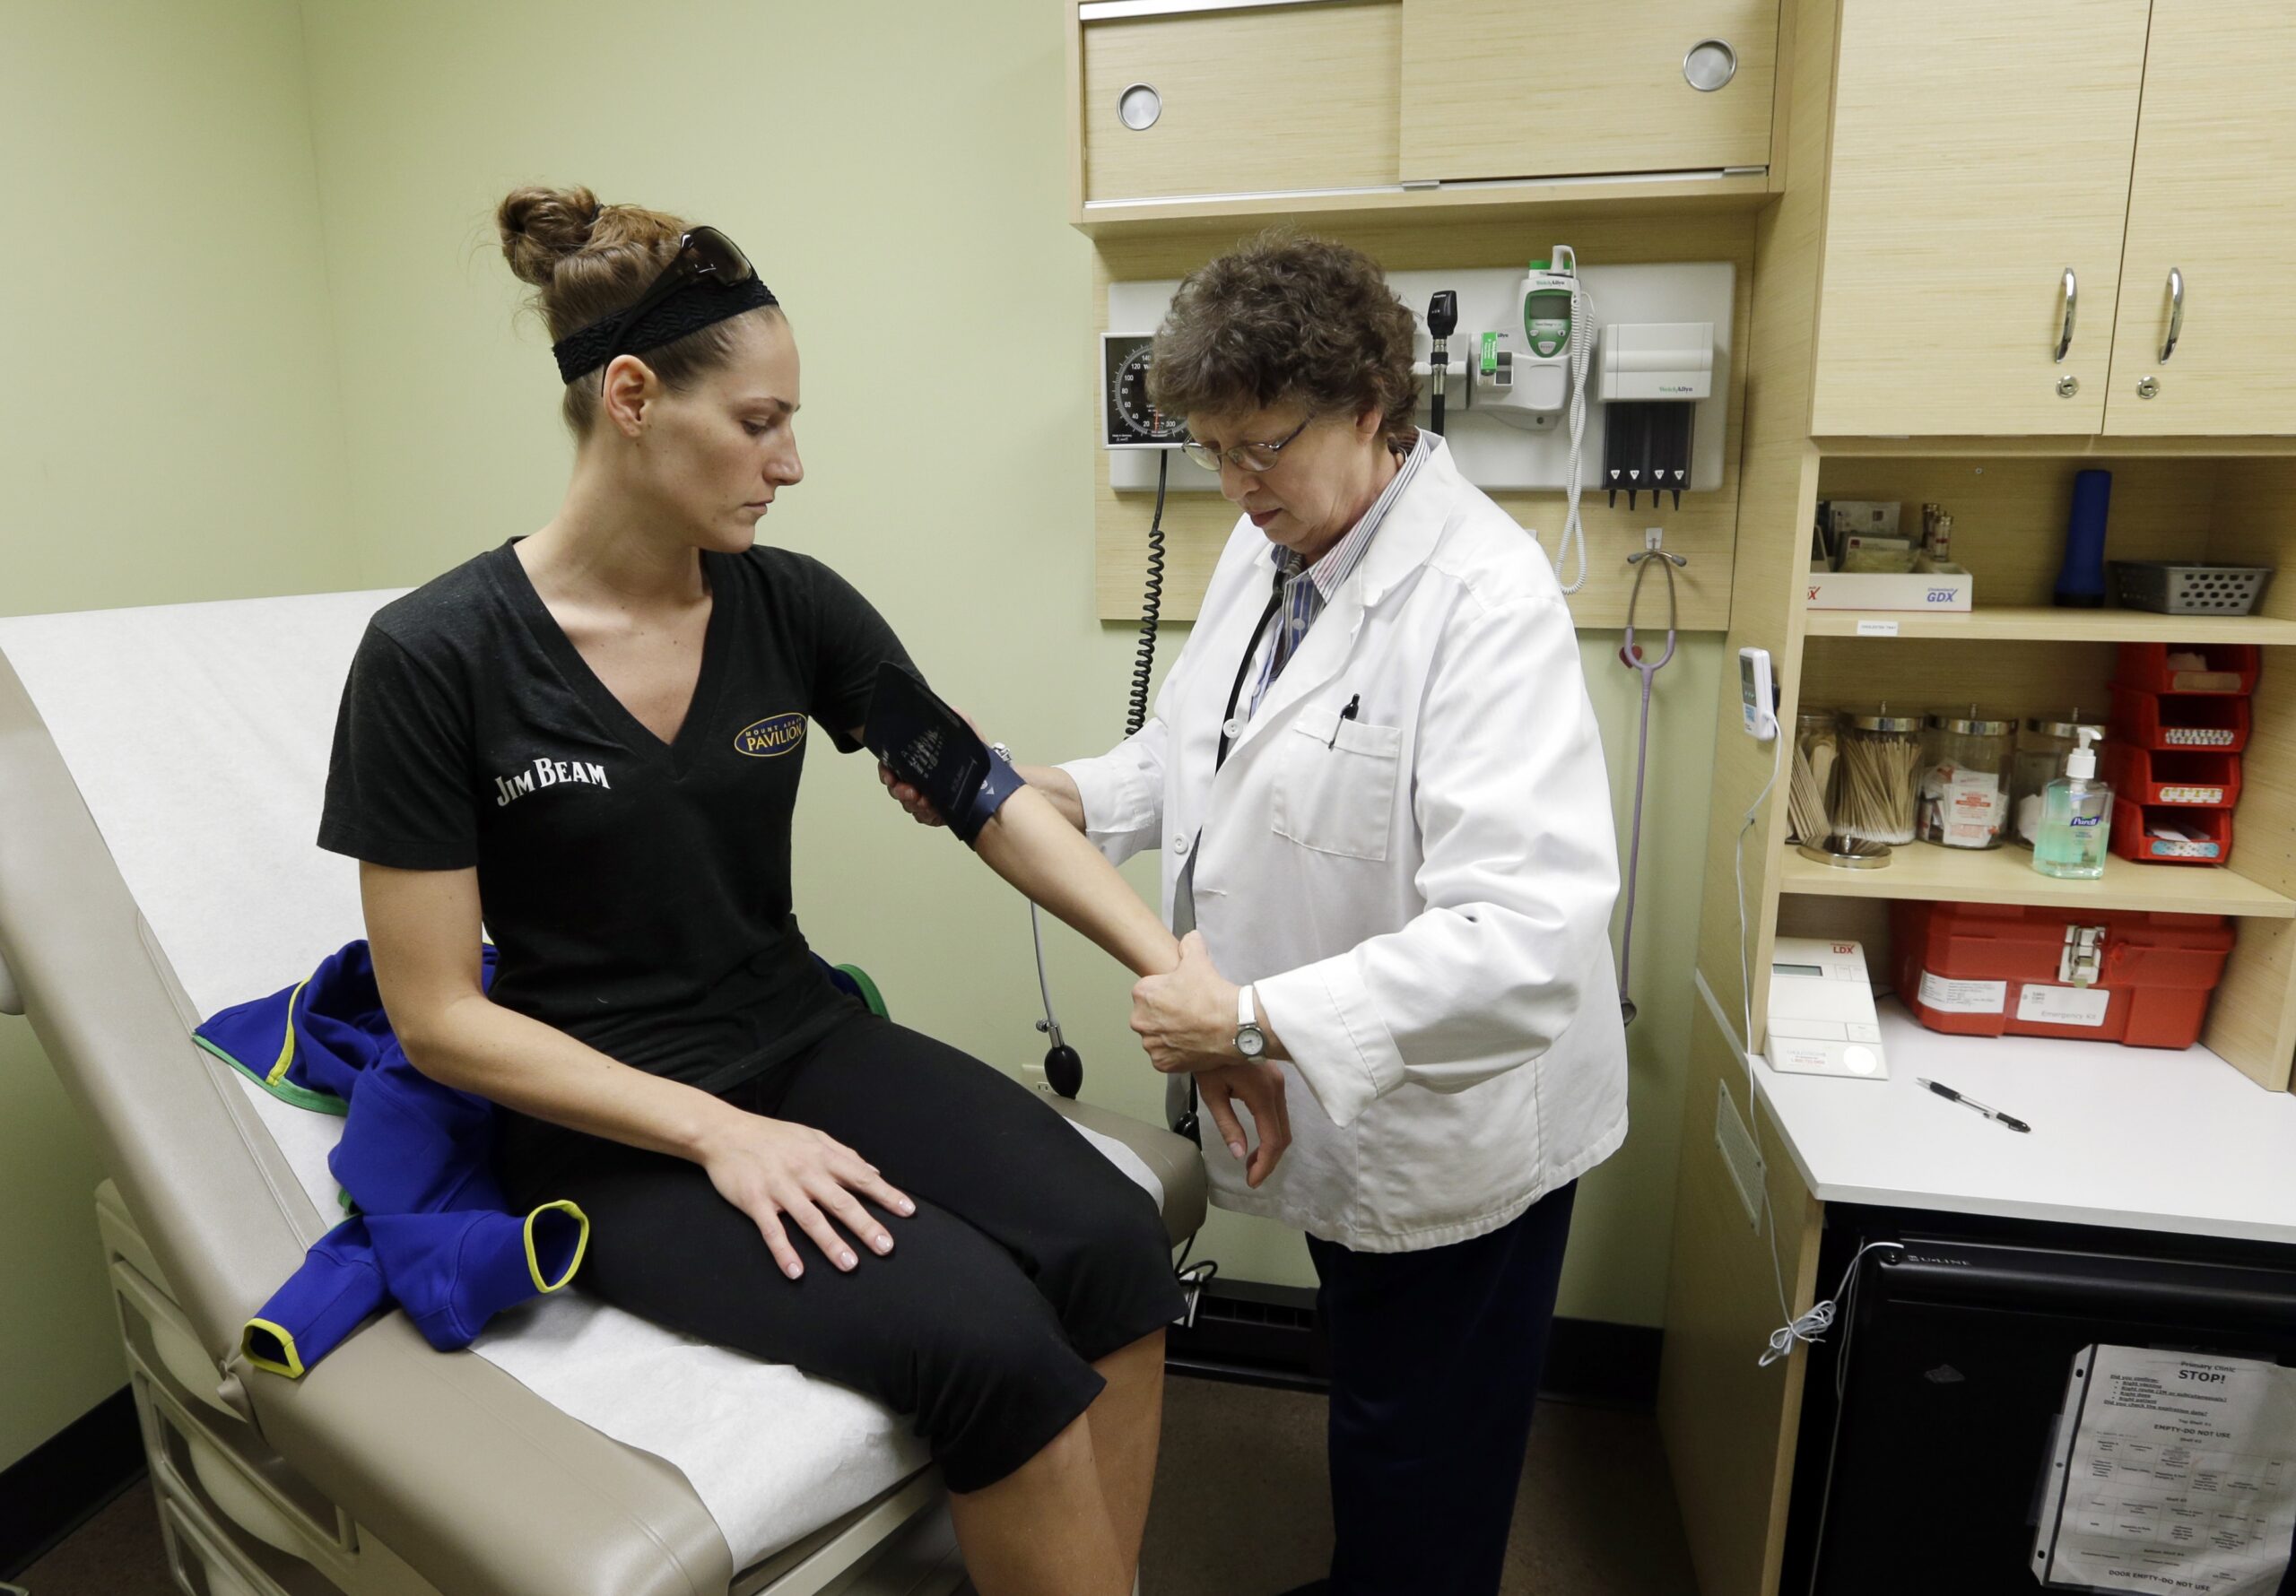 Family Nurse Practitioner Ruth Wiley examines Elizabeth Knowles at a Walgreens Take Care Clinic